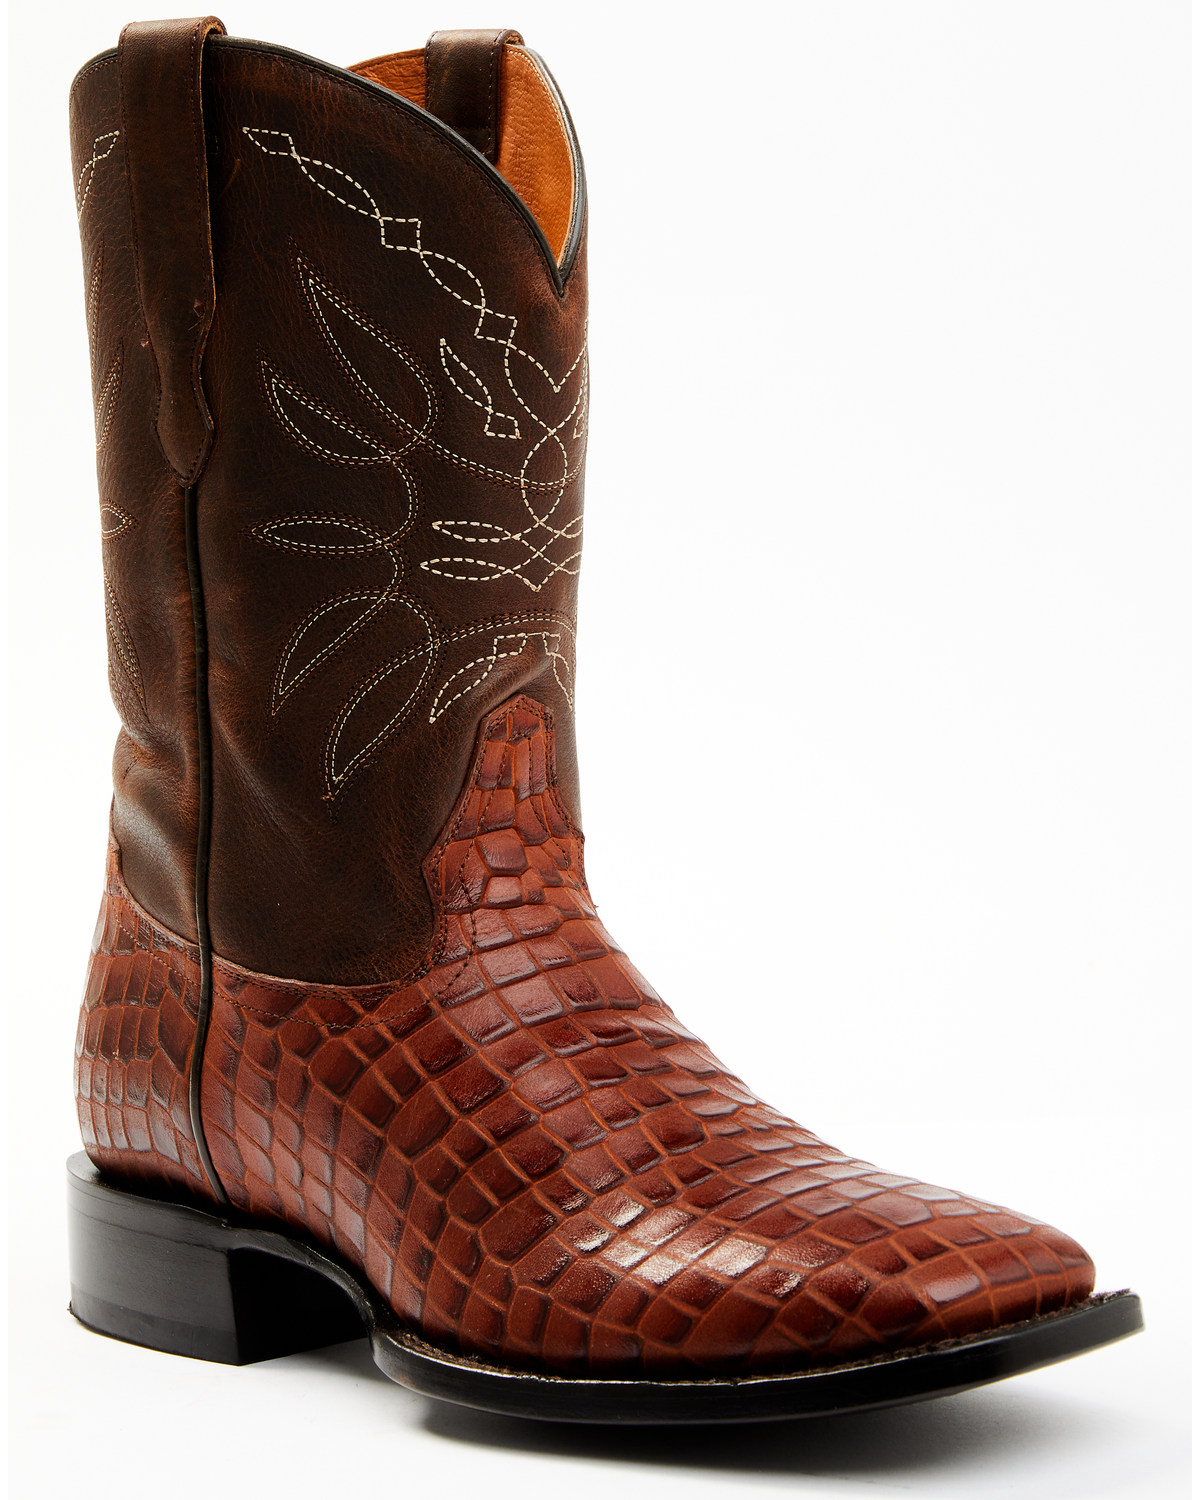 Cody James Men's 11" Western Boots - Broad Square Toe